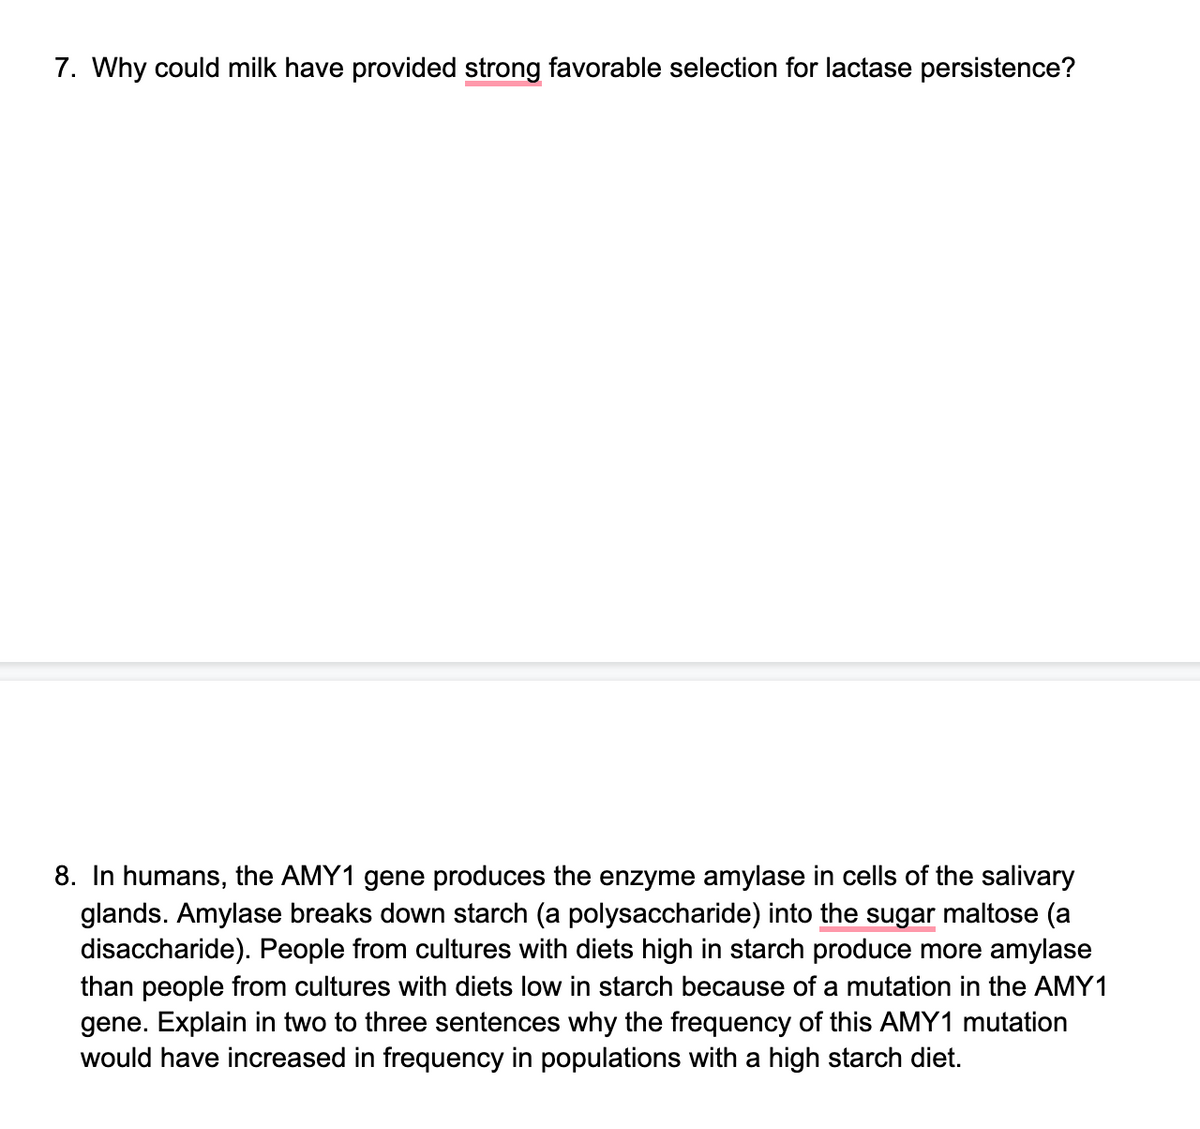 7. Why could milk have provided strong favorable selection for lactase persistence?
8. In humans, the AMY1 gene produces the enzyme amylase in cells of the salivary
glands. Amylase breaks down starch (a polysaccharide) into the sugar maltose (a
disaccharide). People from cultures with diets high in starch produce more amylase
than people from cultures with diets low in starch because of a mutation in the AMY1
gene. Explain in two to three sentences why the frequency of this AMY1 mutation
would have increased in frequency in populations with a high starch diet.
